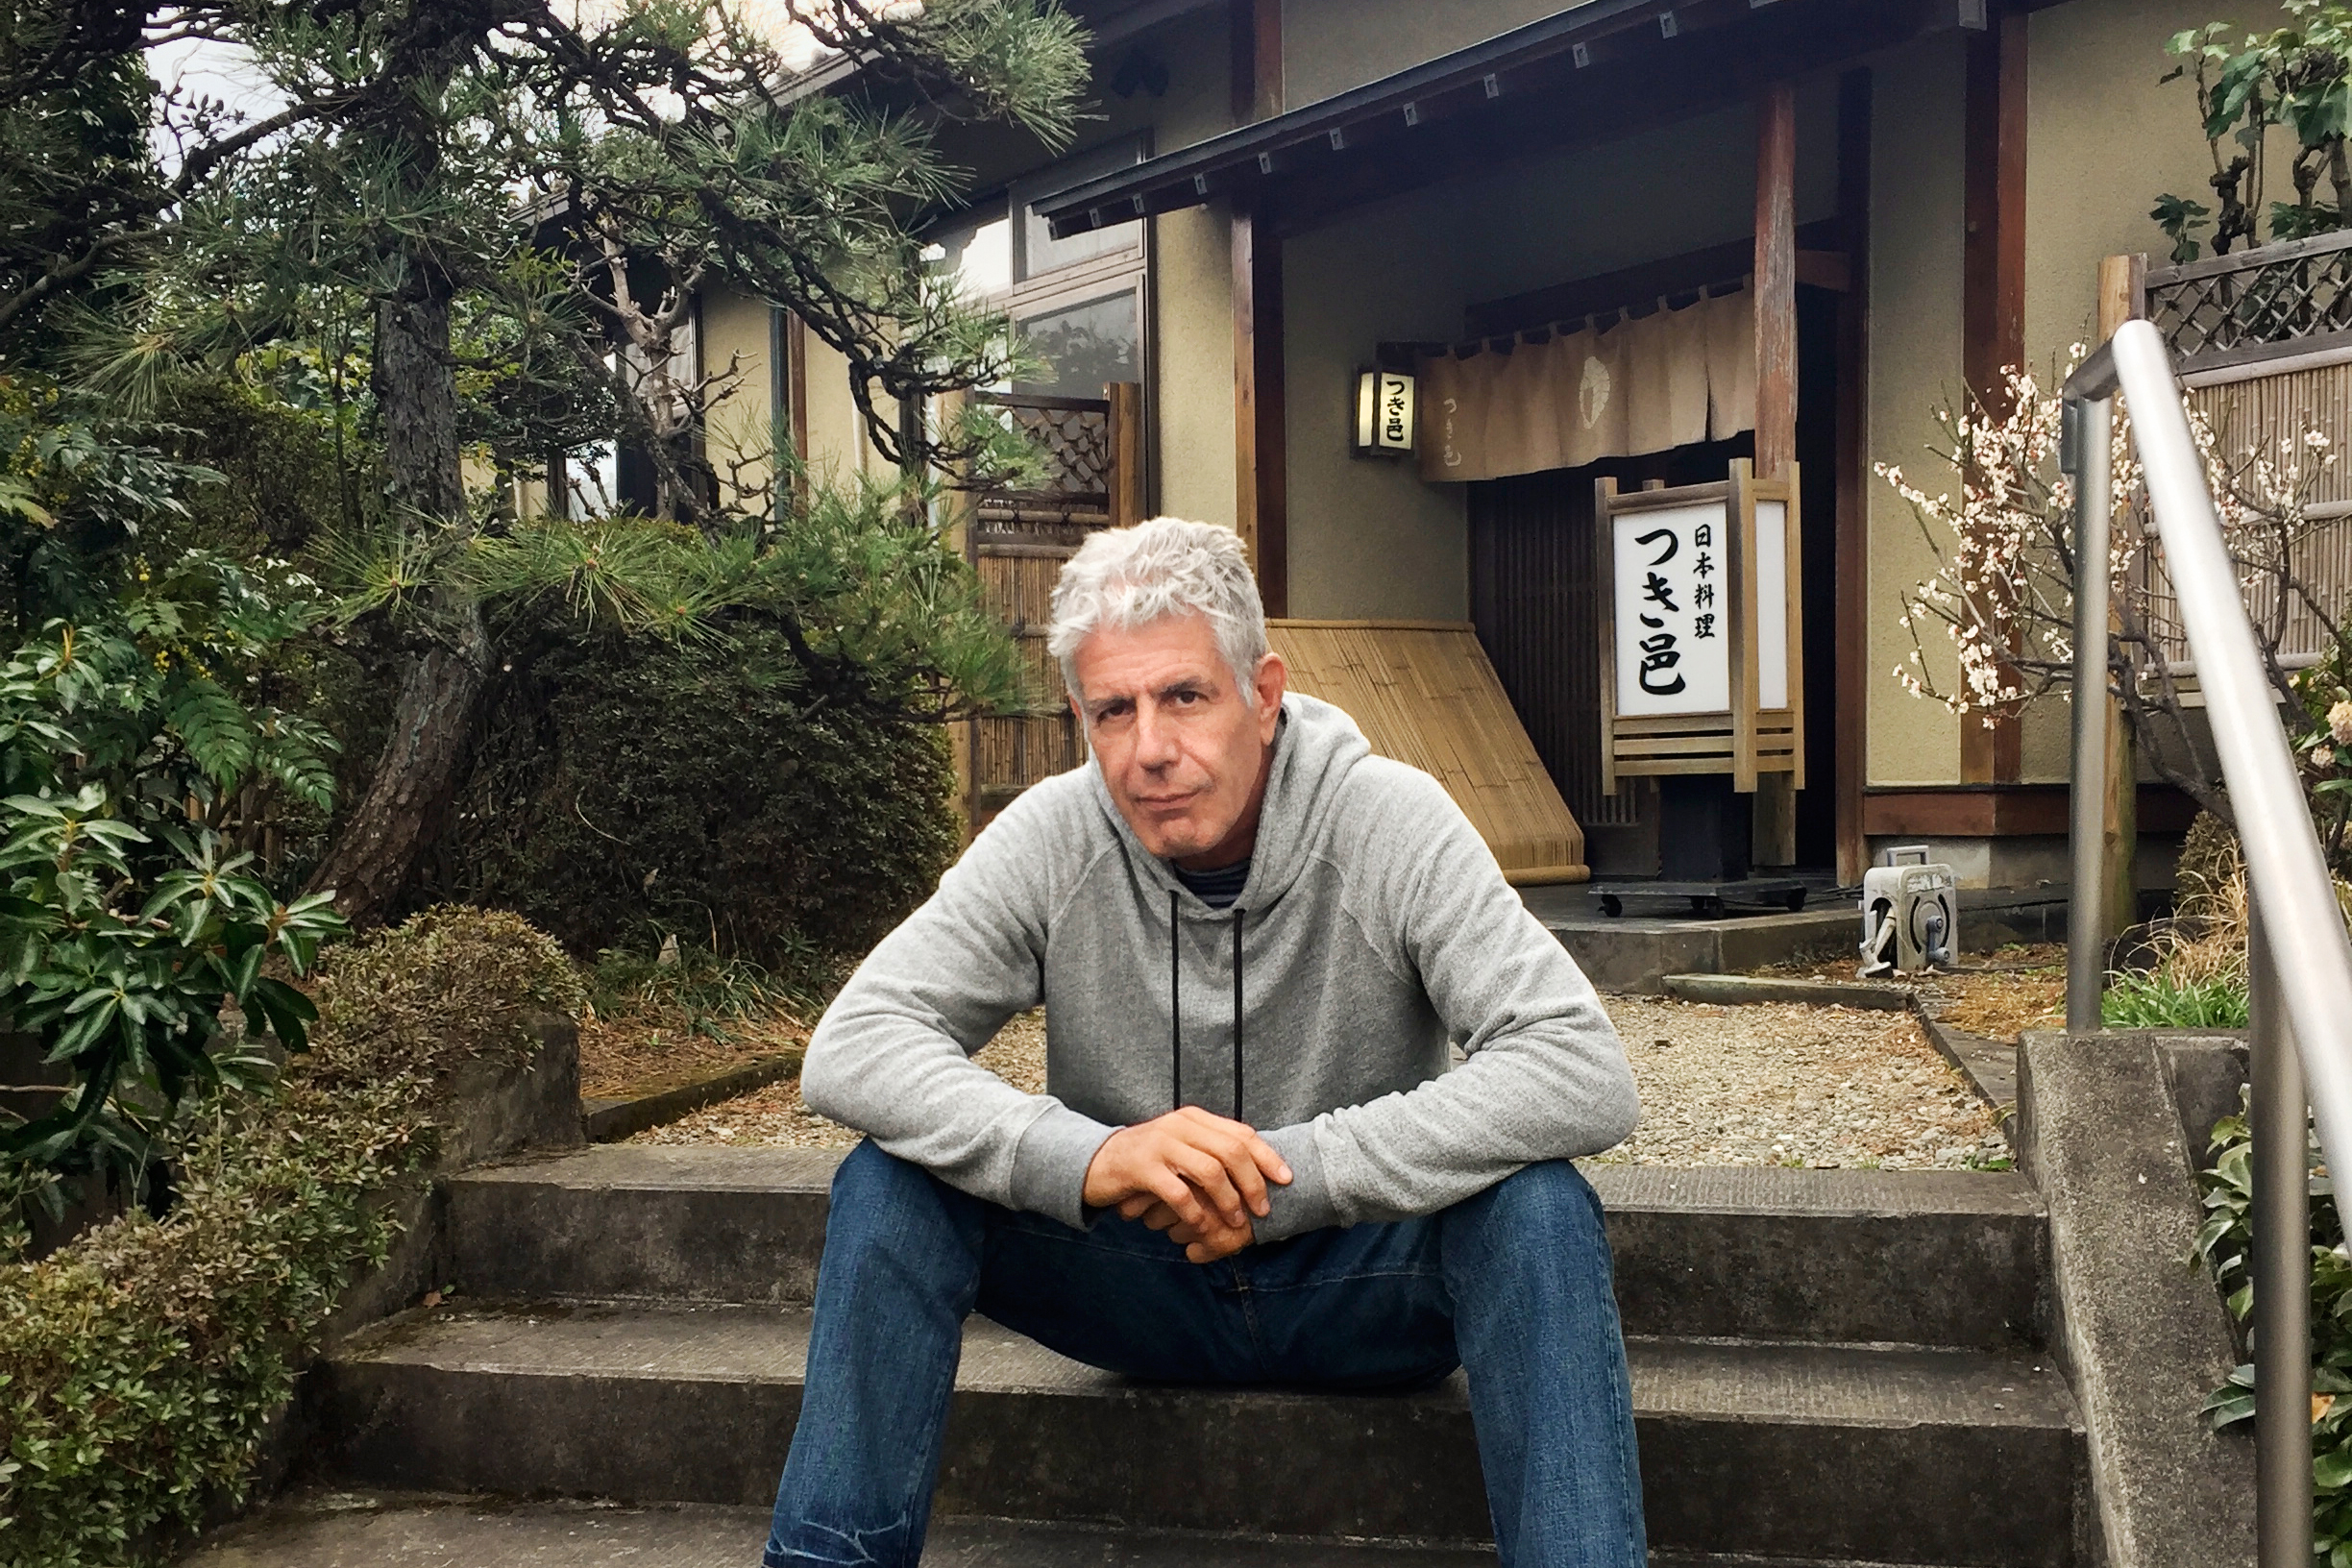 Anthony Bourdain's Top 5 Things To Do in His Favorite City